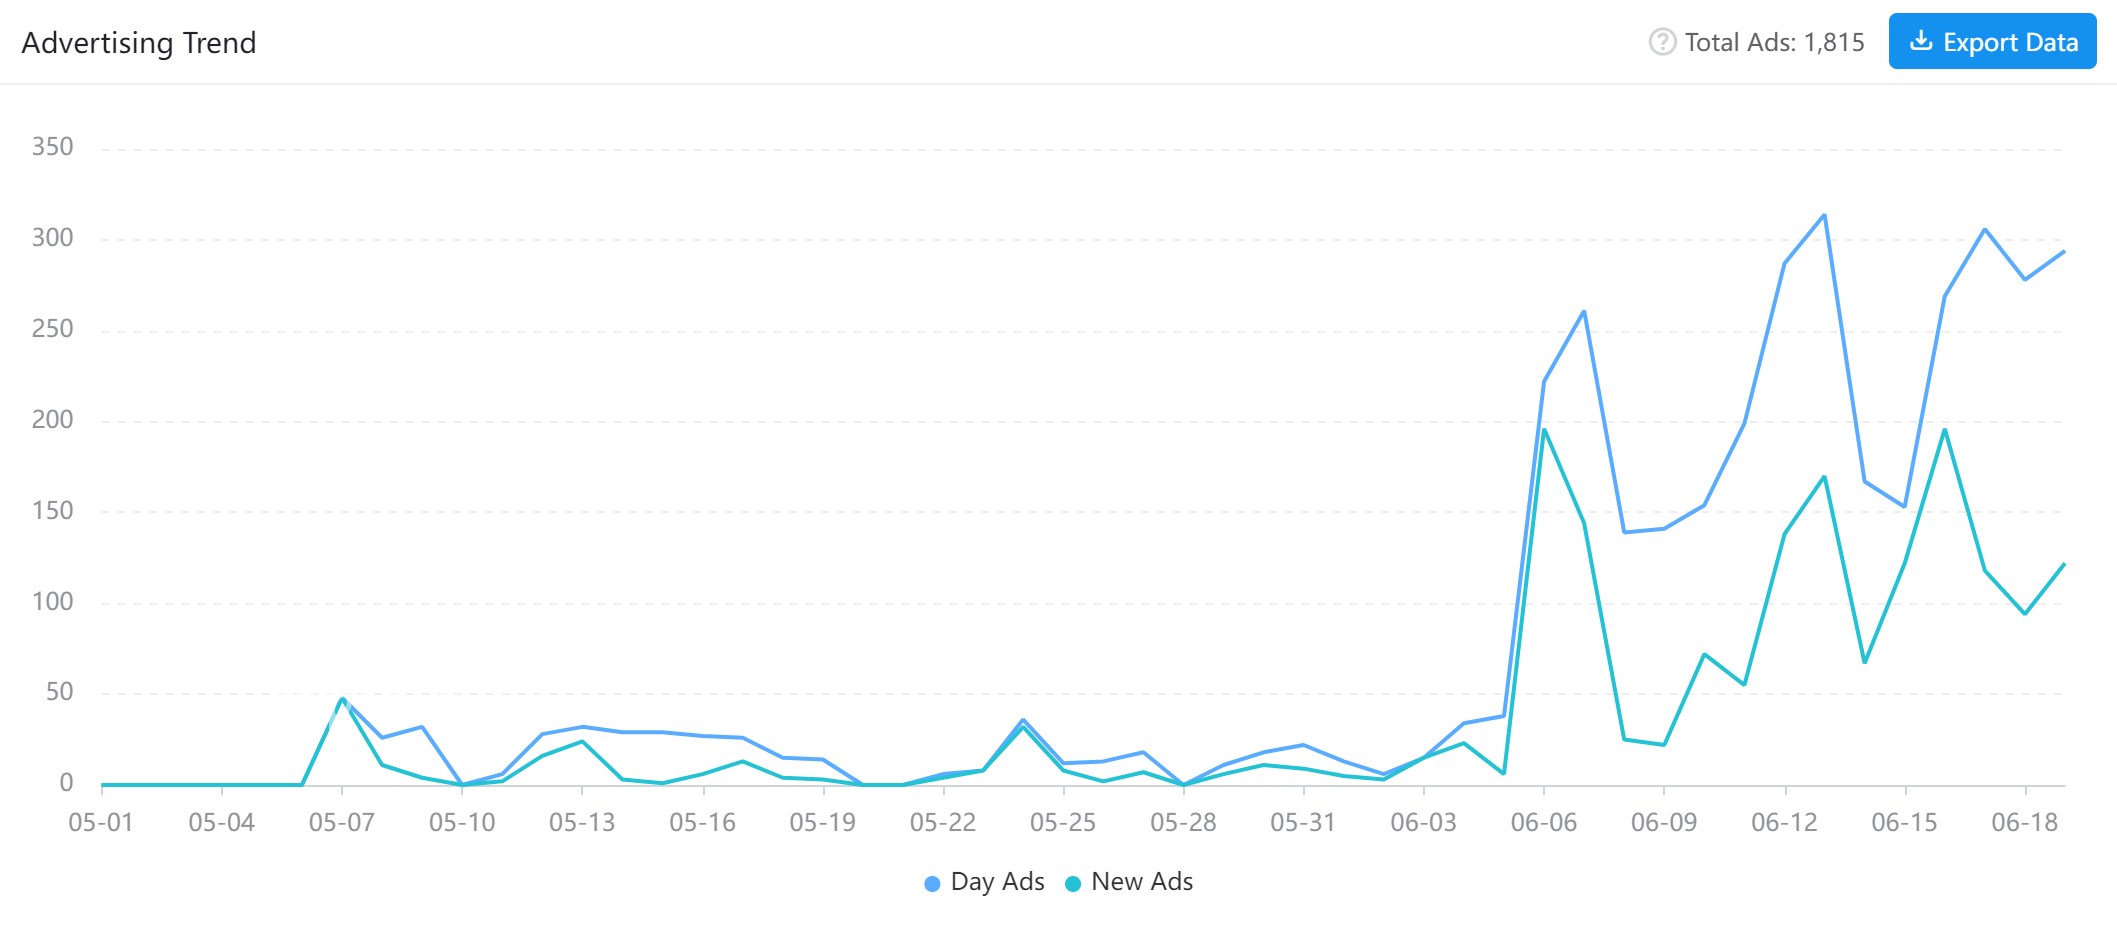 Watcher of Realms began its advertising in early May and then scaled it up in June, with the maximum number of ads in a single day exceeding 300. The trend suggests that the number will continue to increase.